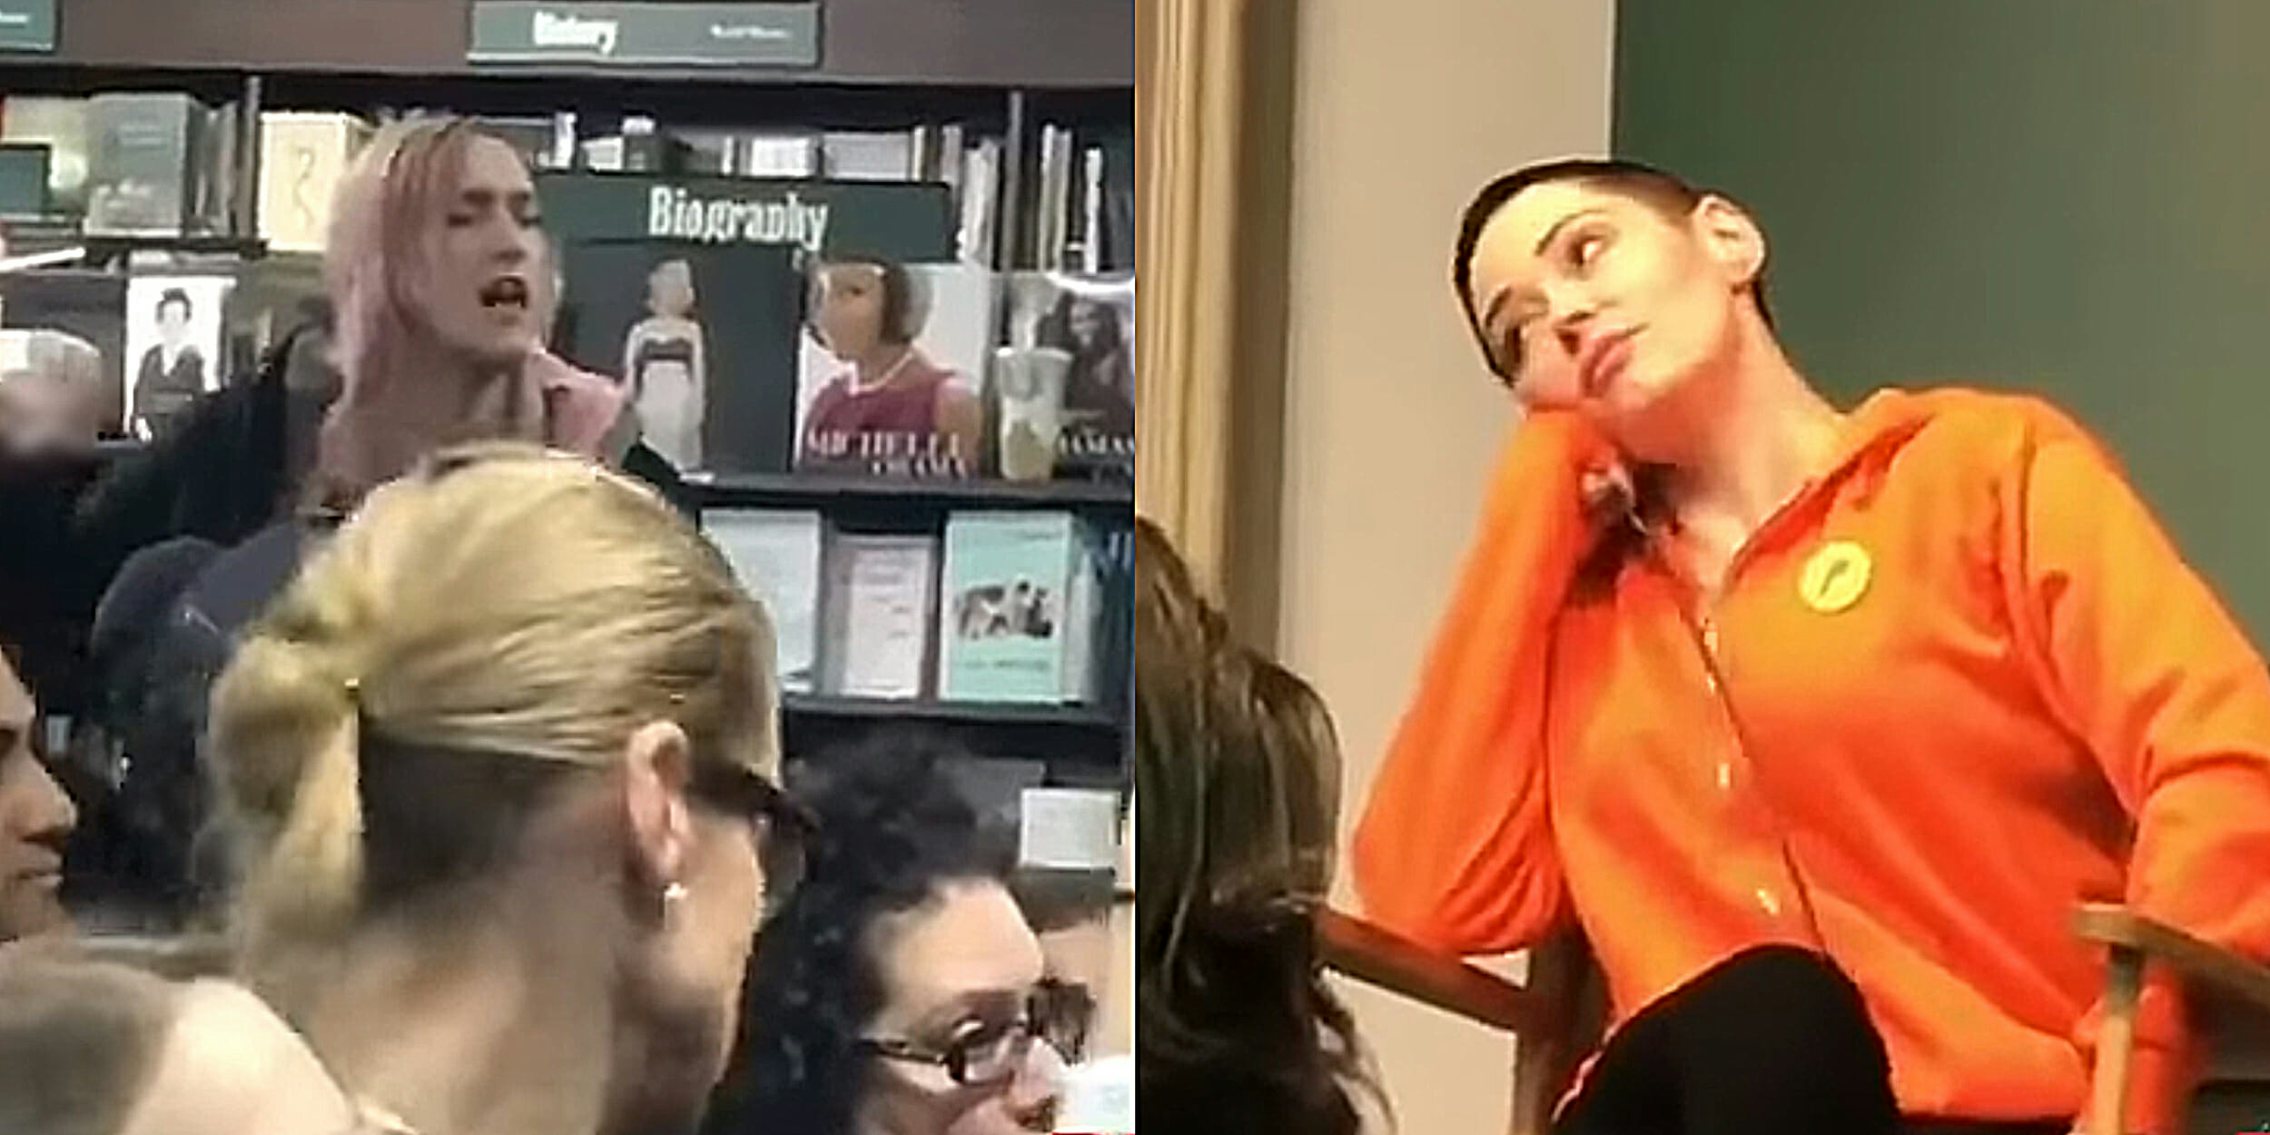 Rose McGowan is confronted by a trans woman at a book signing